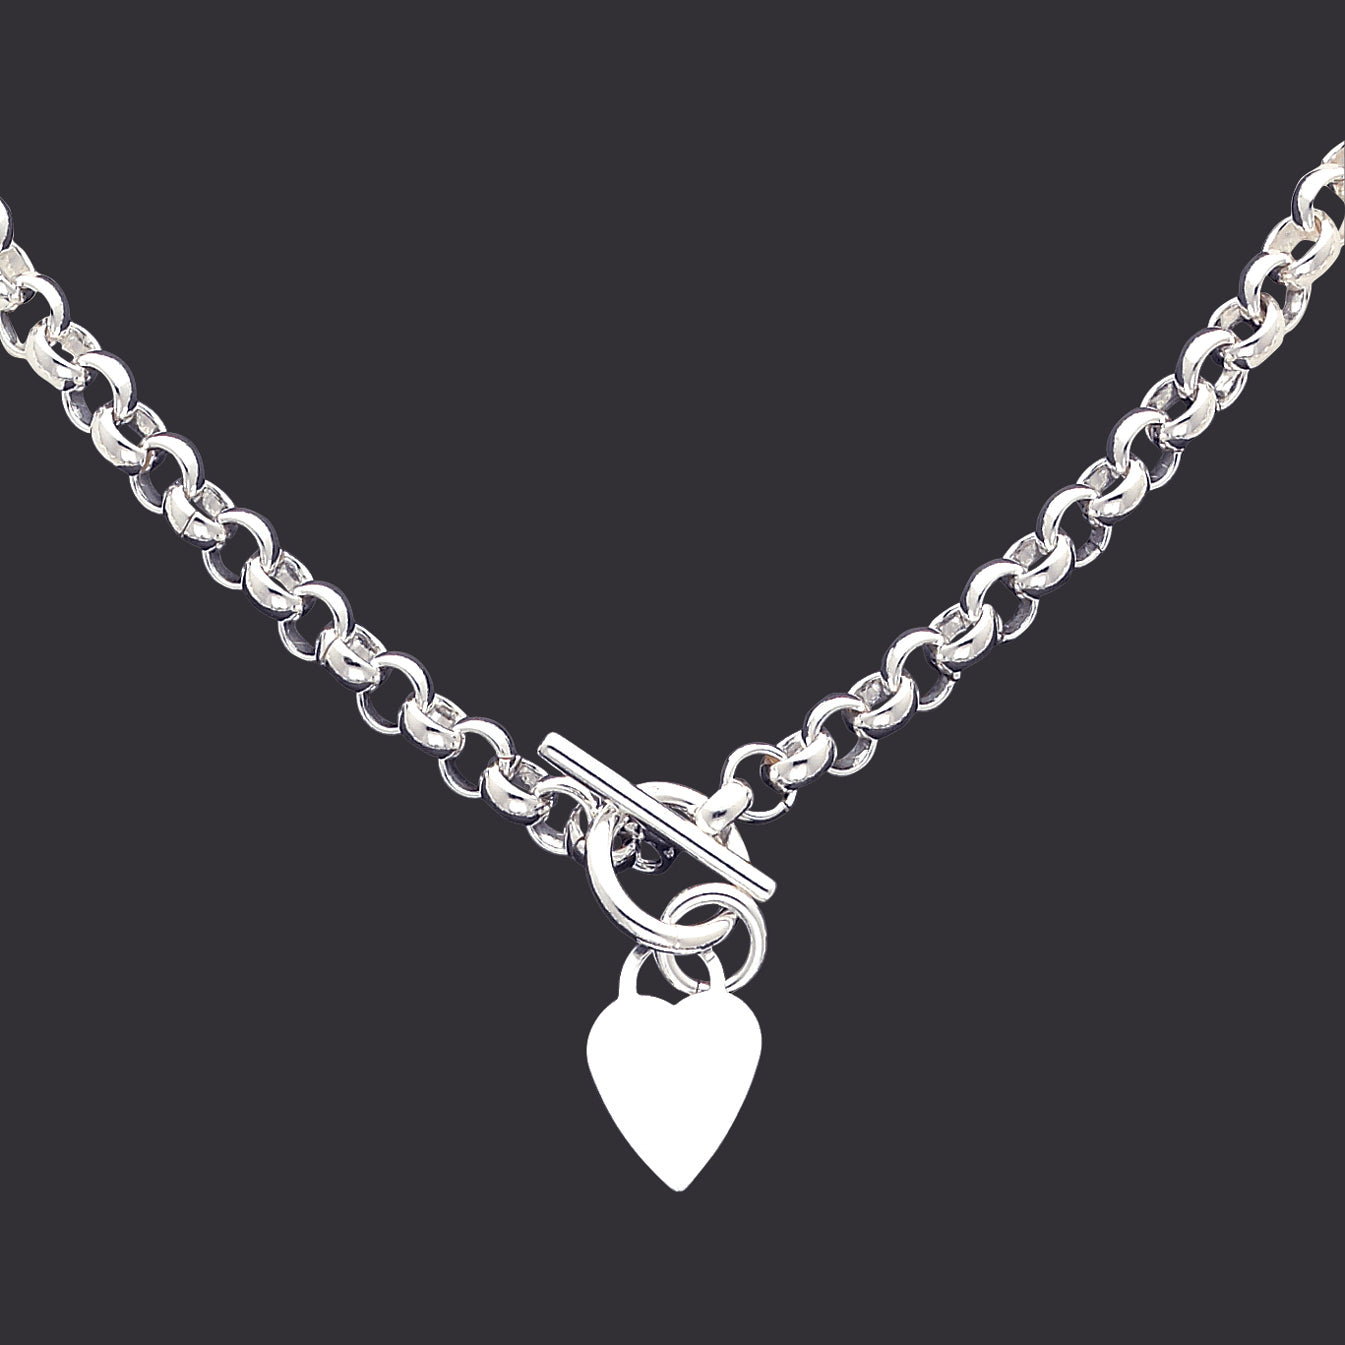 Double Heart Toggle Necklace In 925 Sterling Silver 25 mm x 29 mm | eBay